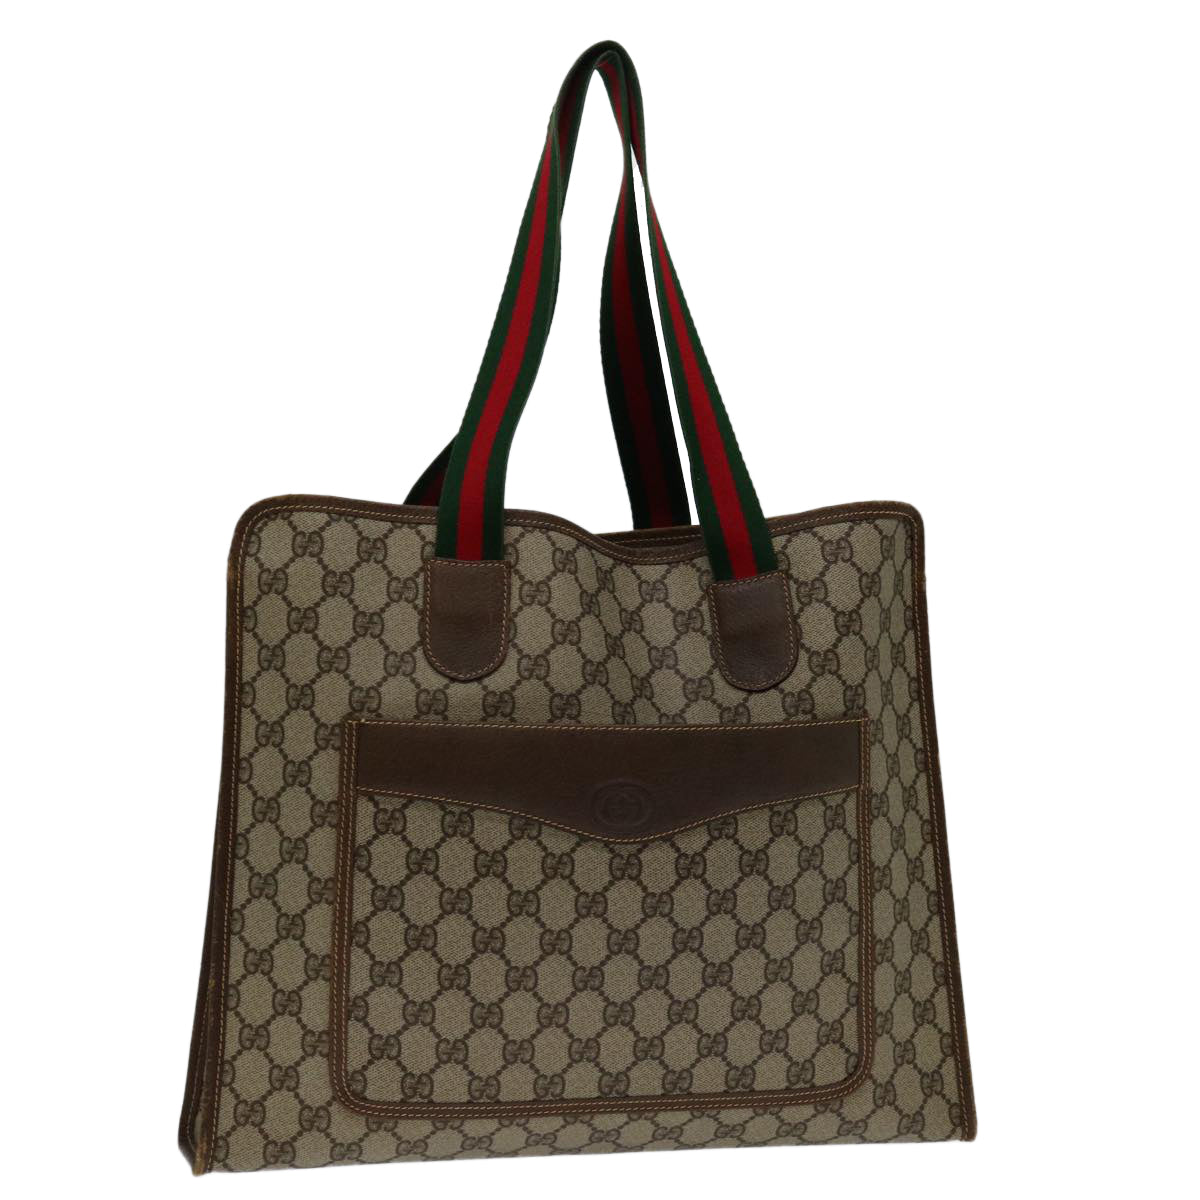 GUCCI GG Supreme Web Sherry Line Tote Bag Beige Red Green 002 123 Auth yk11337